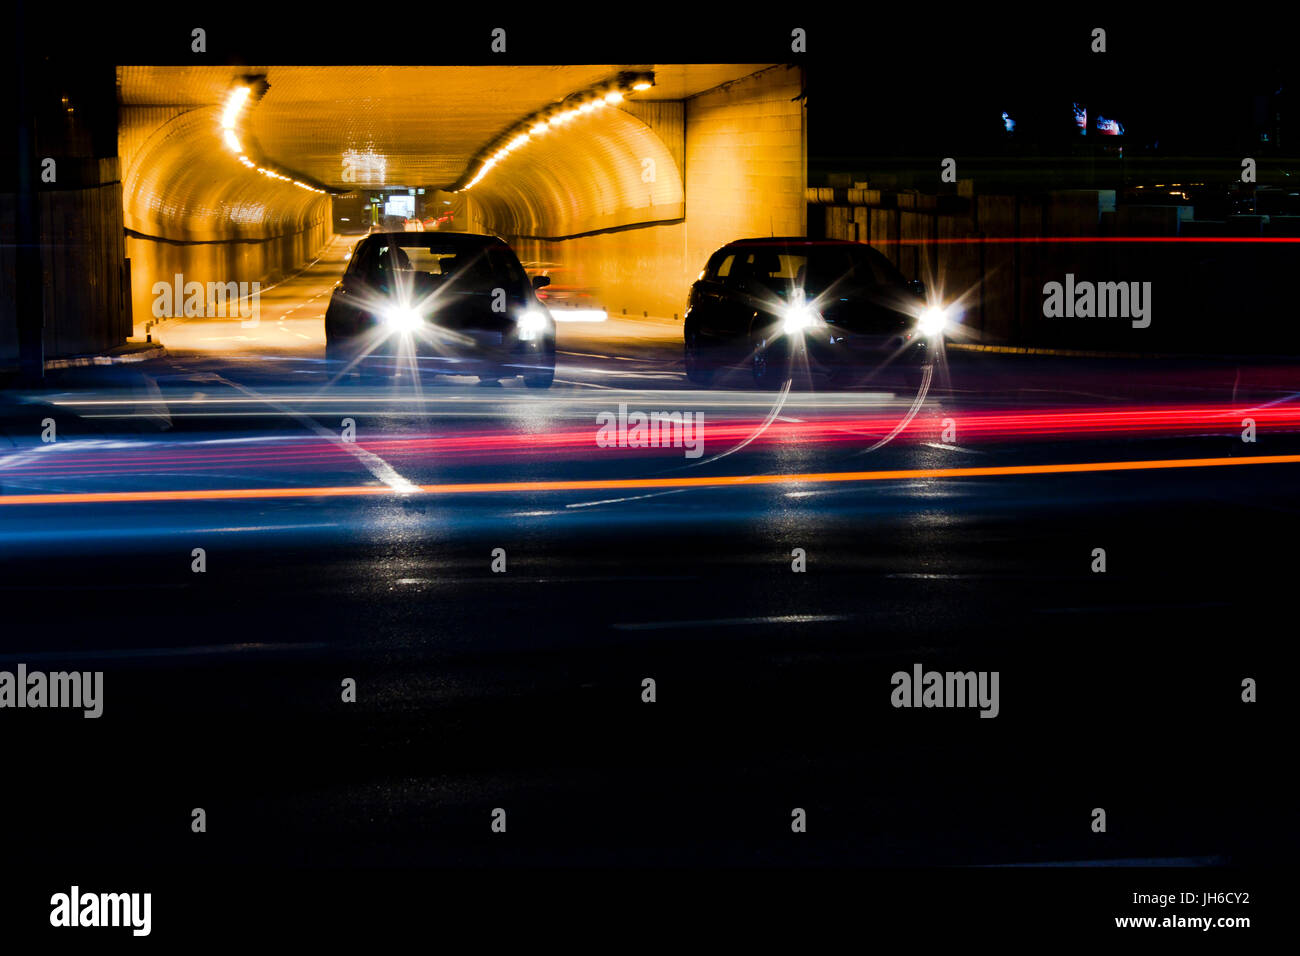 Night traffic on city streets. Cars queued at tunnel exit waiting at intersection while driving vehicles moving past leaving color light trails Stock Photo